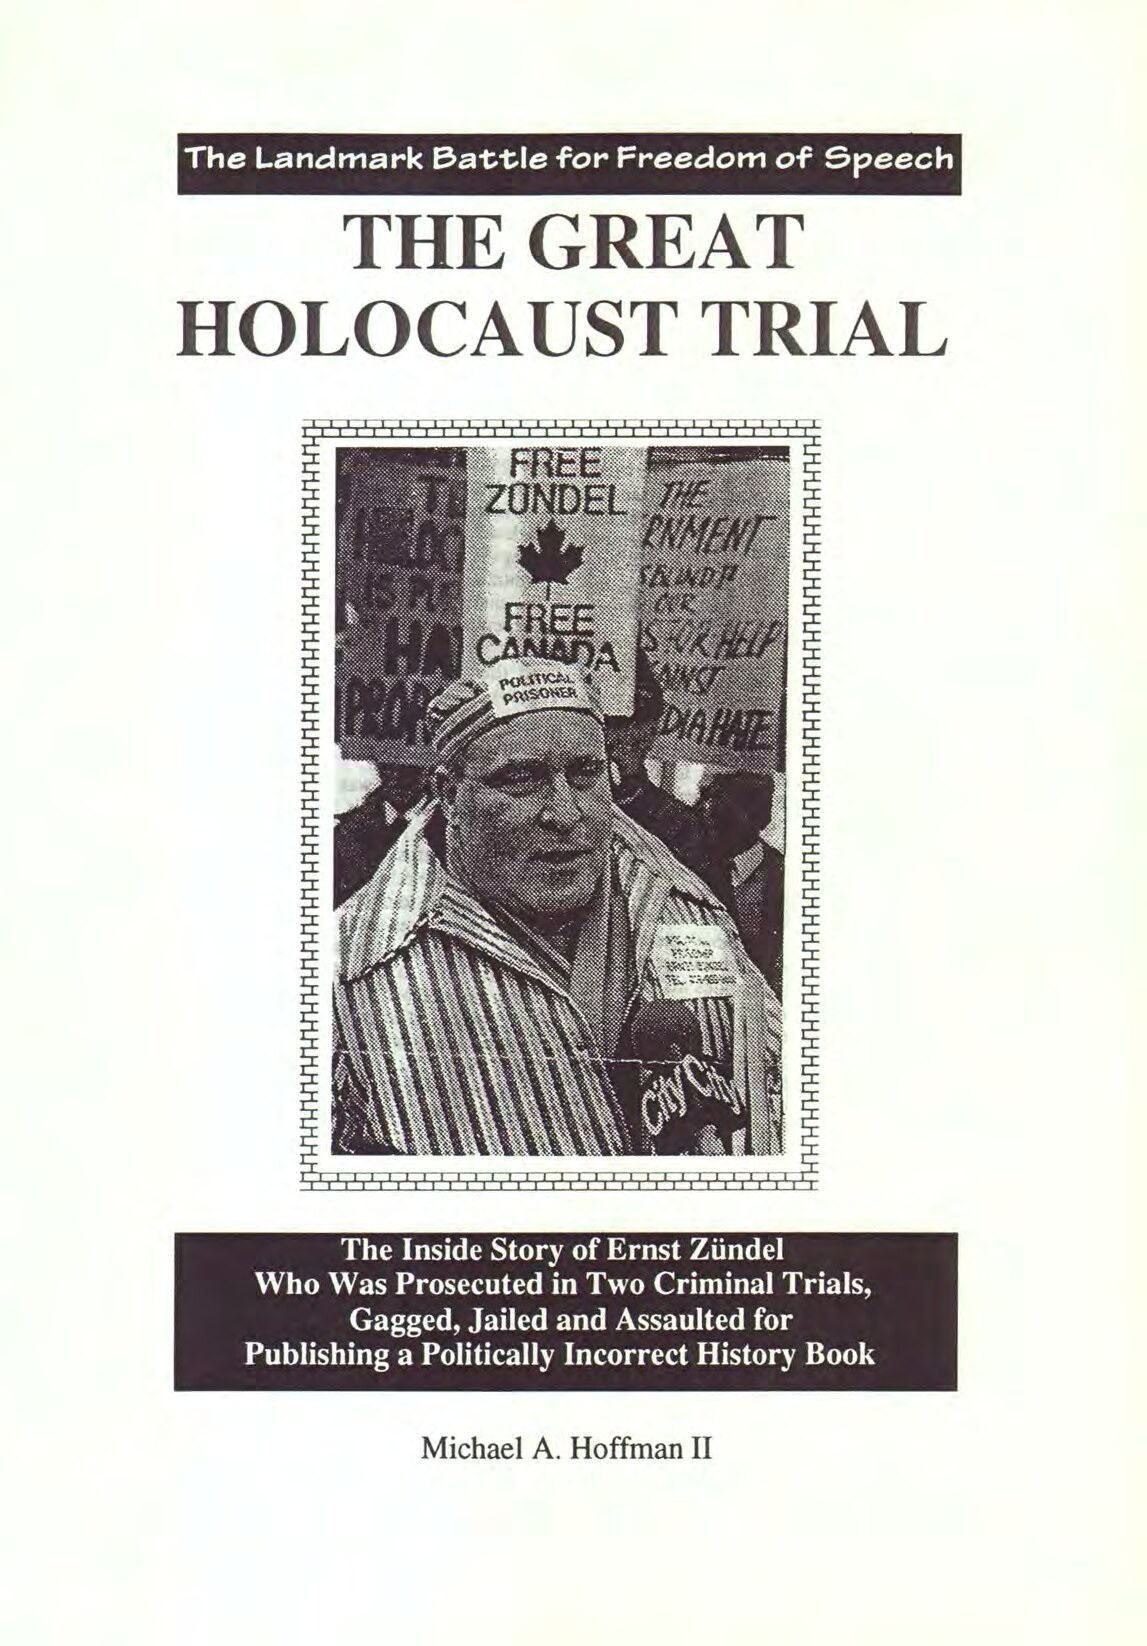 The Great Holocaust Trial